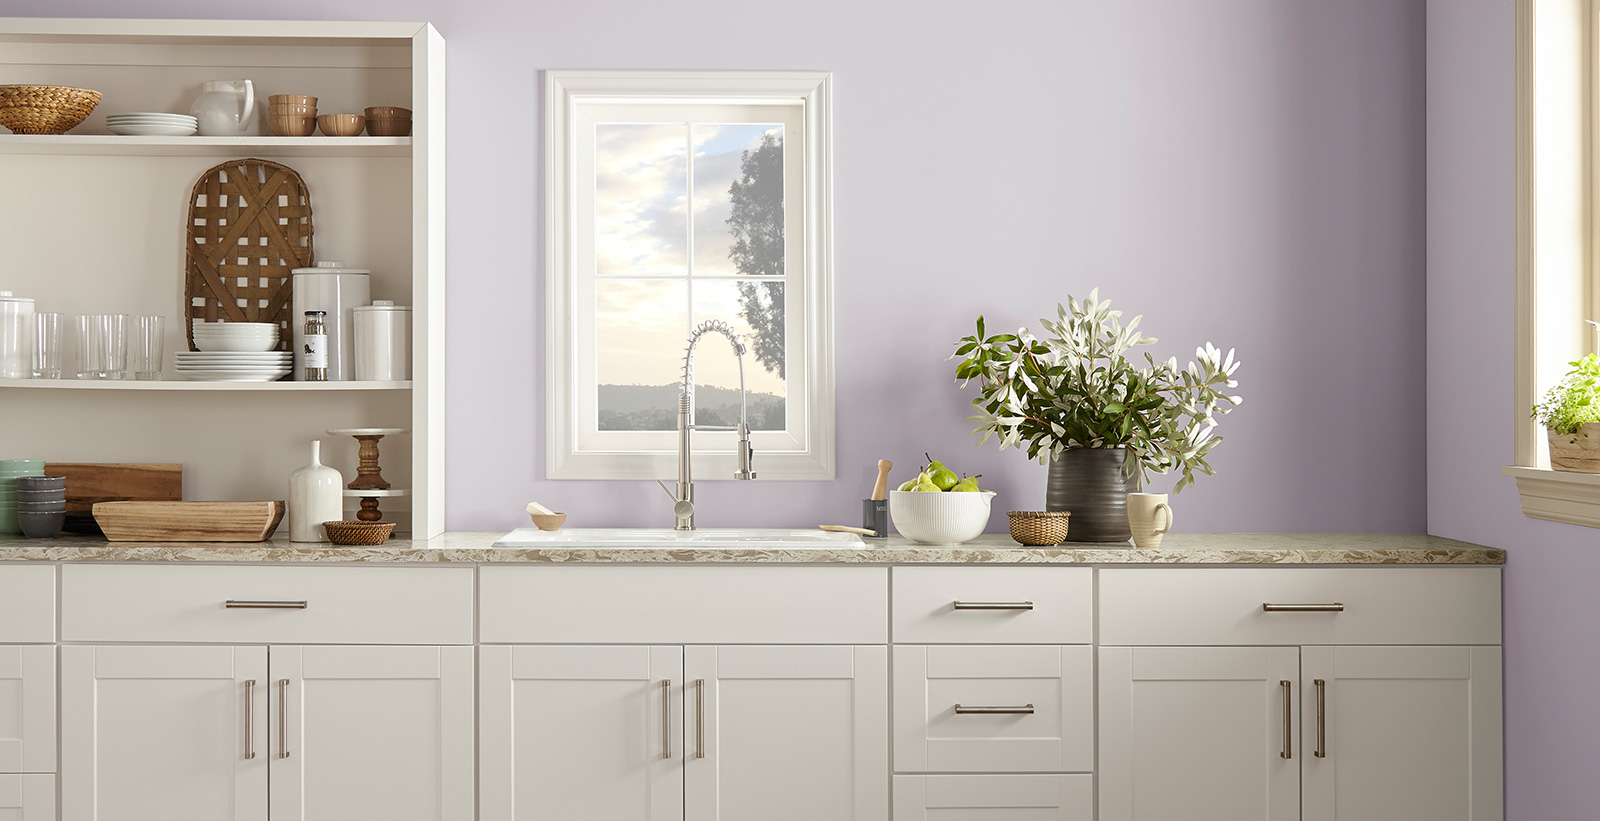 Light lilac kitchen wall paint color